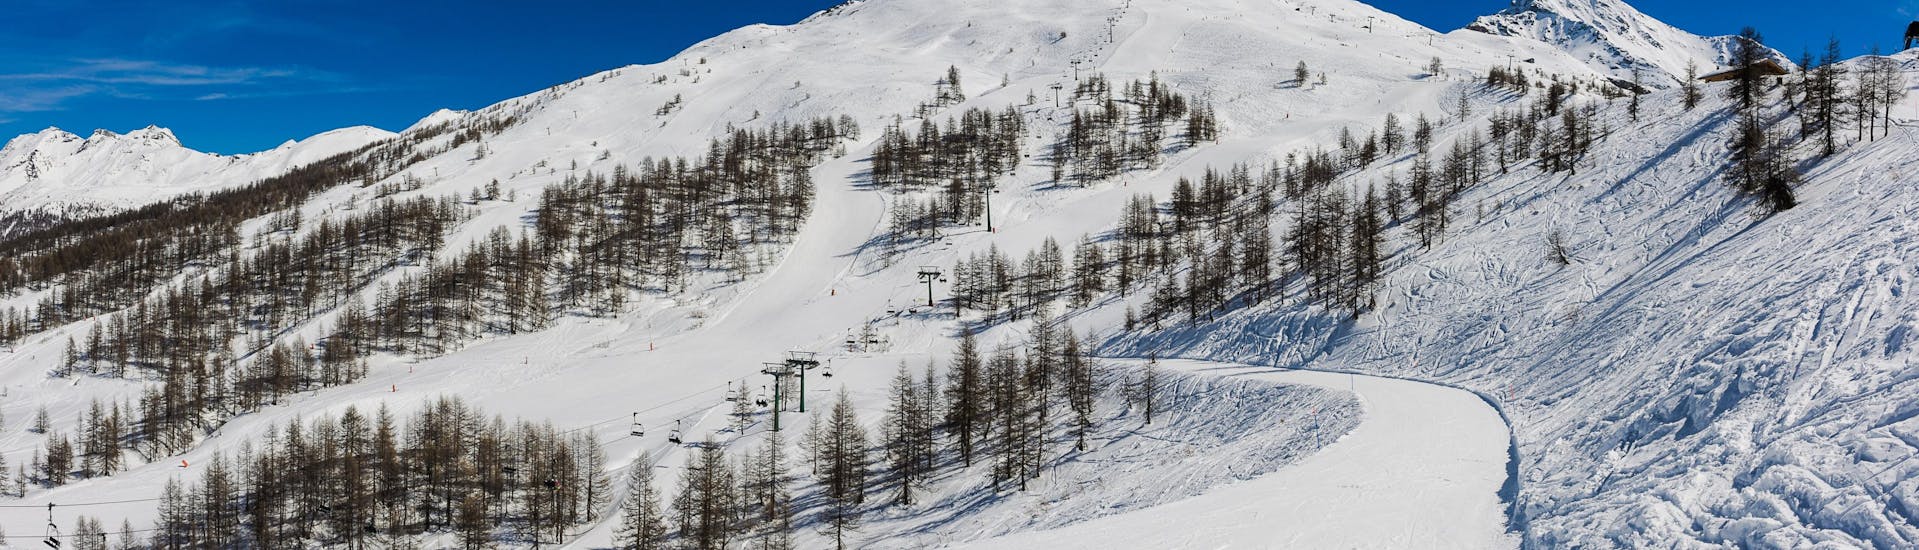 A view of the ski slopes of Vialattea in Piedmont, where local ski schools take aspiring skiers for their ski lessons.